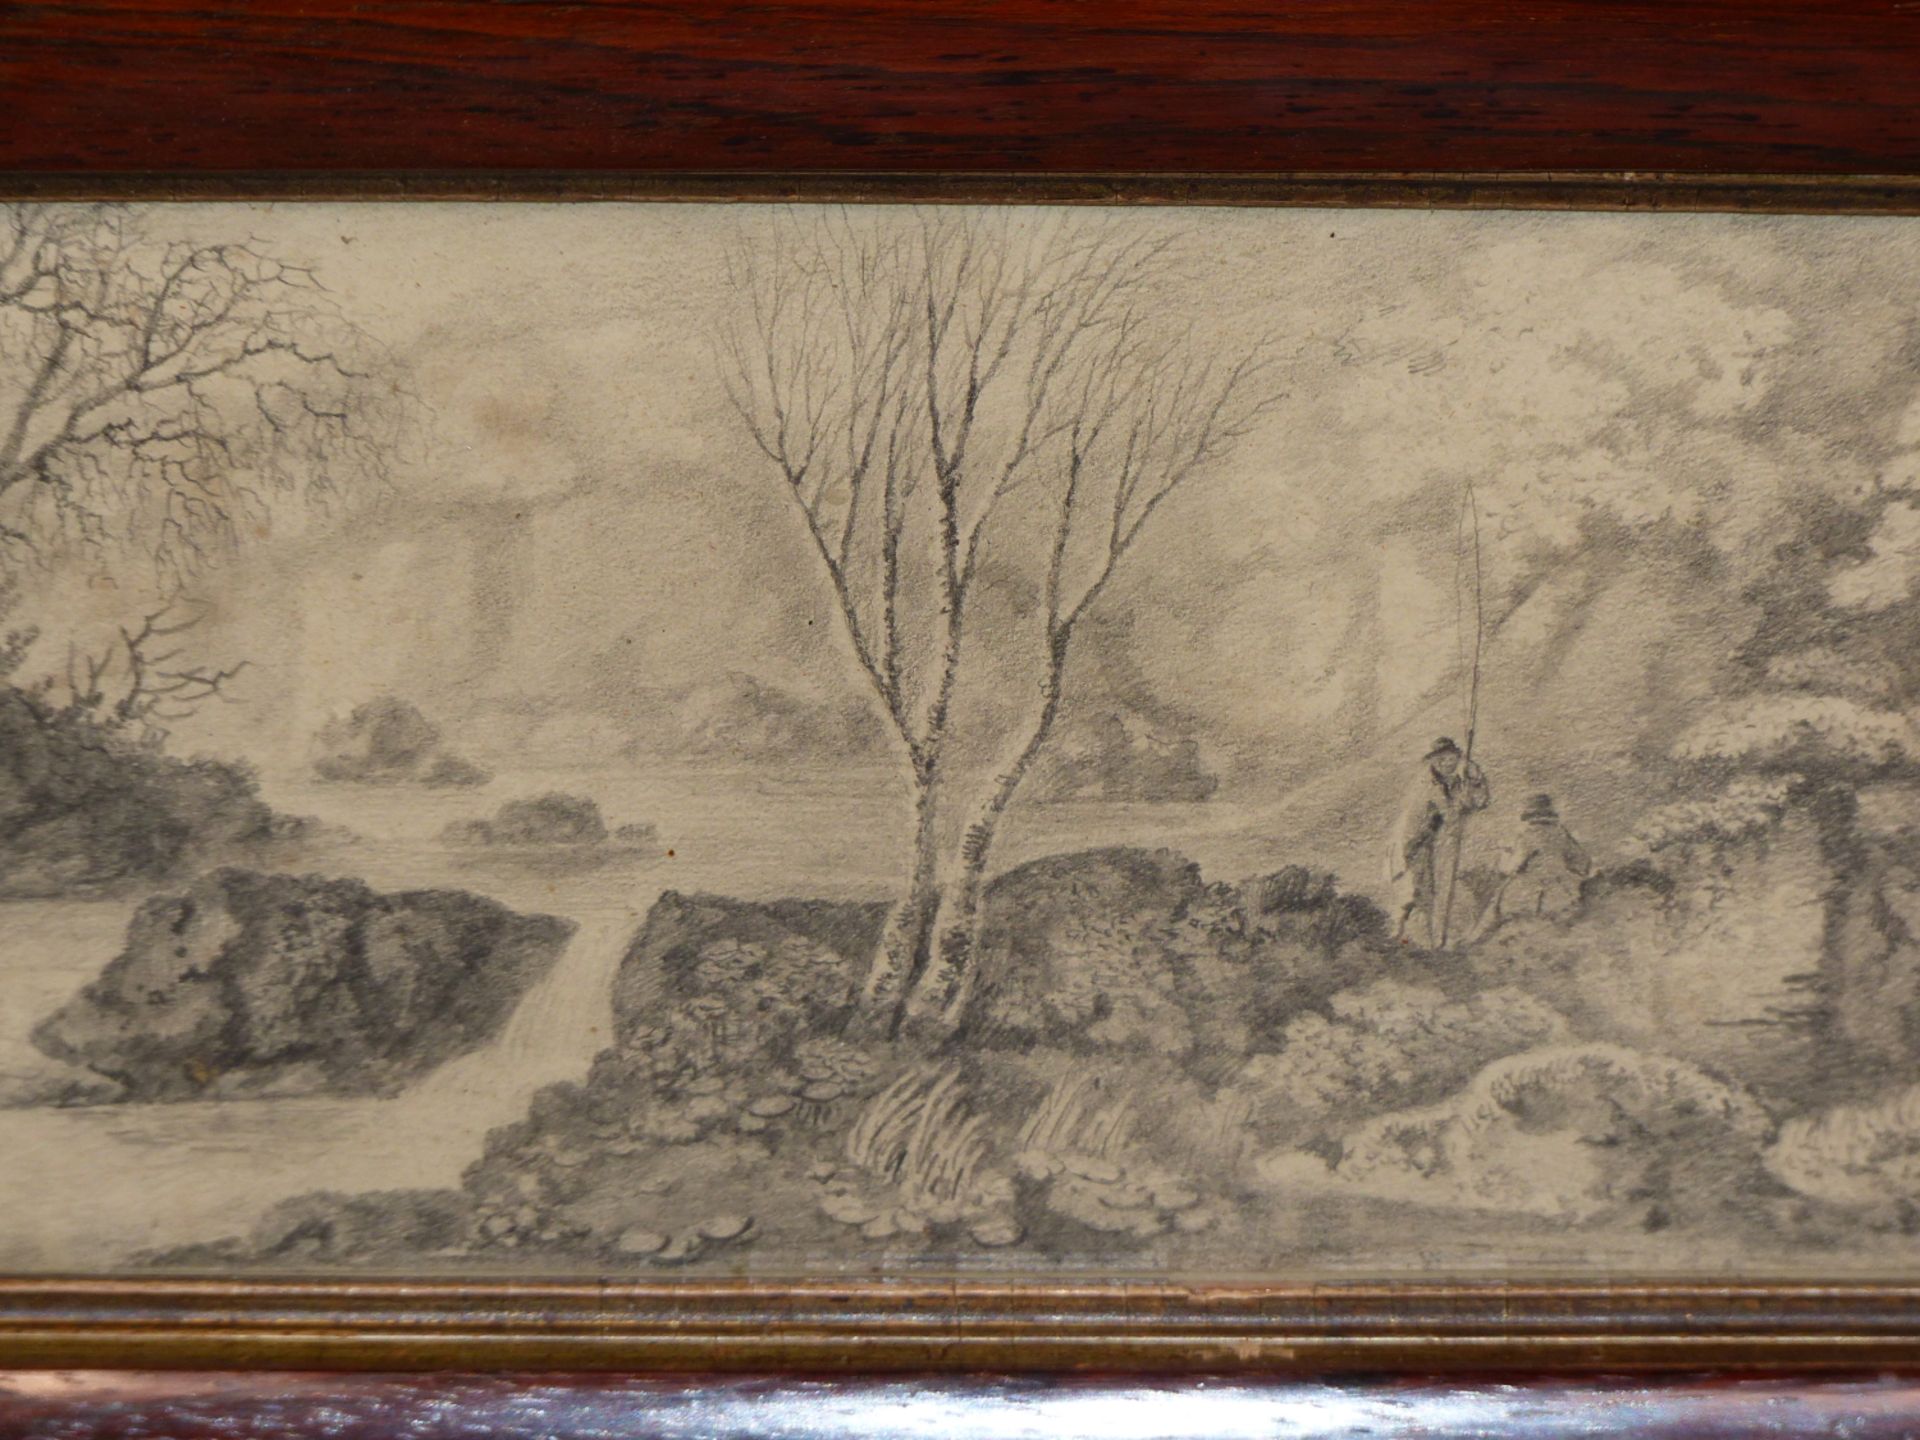 EARLY 19TH CENTURY ENGLISH SCHOOL. FISHERMEN BY RIVER WITH WATERFALL. PENCIL ON PAPER. 25 X 12.5 cm - Image 3 of 5